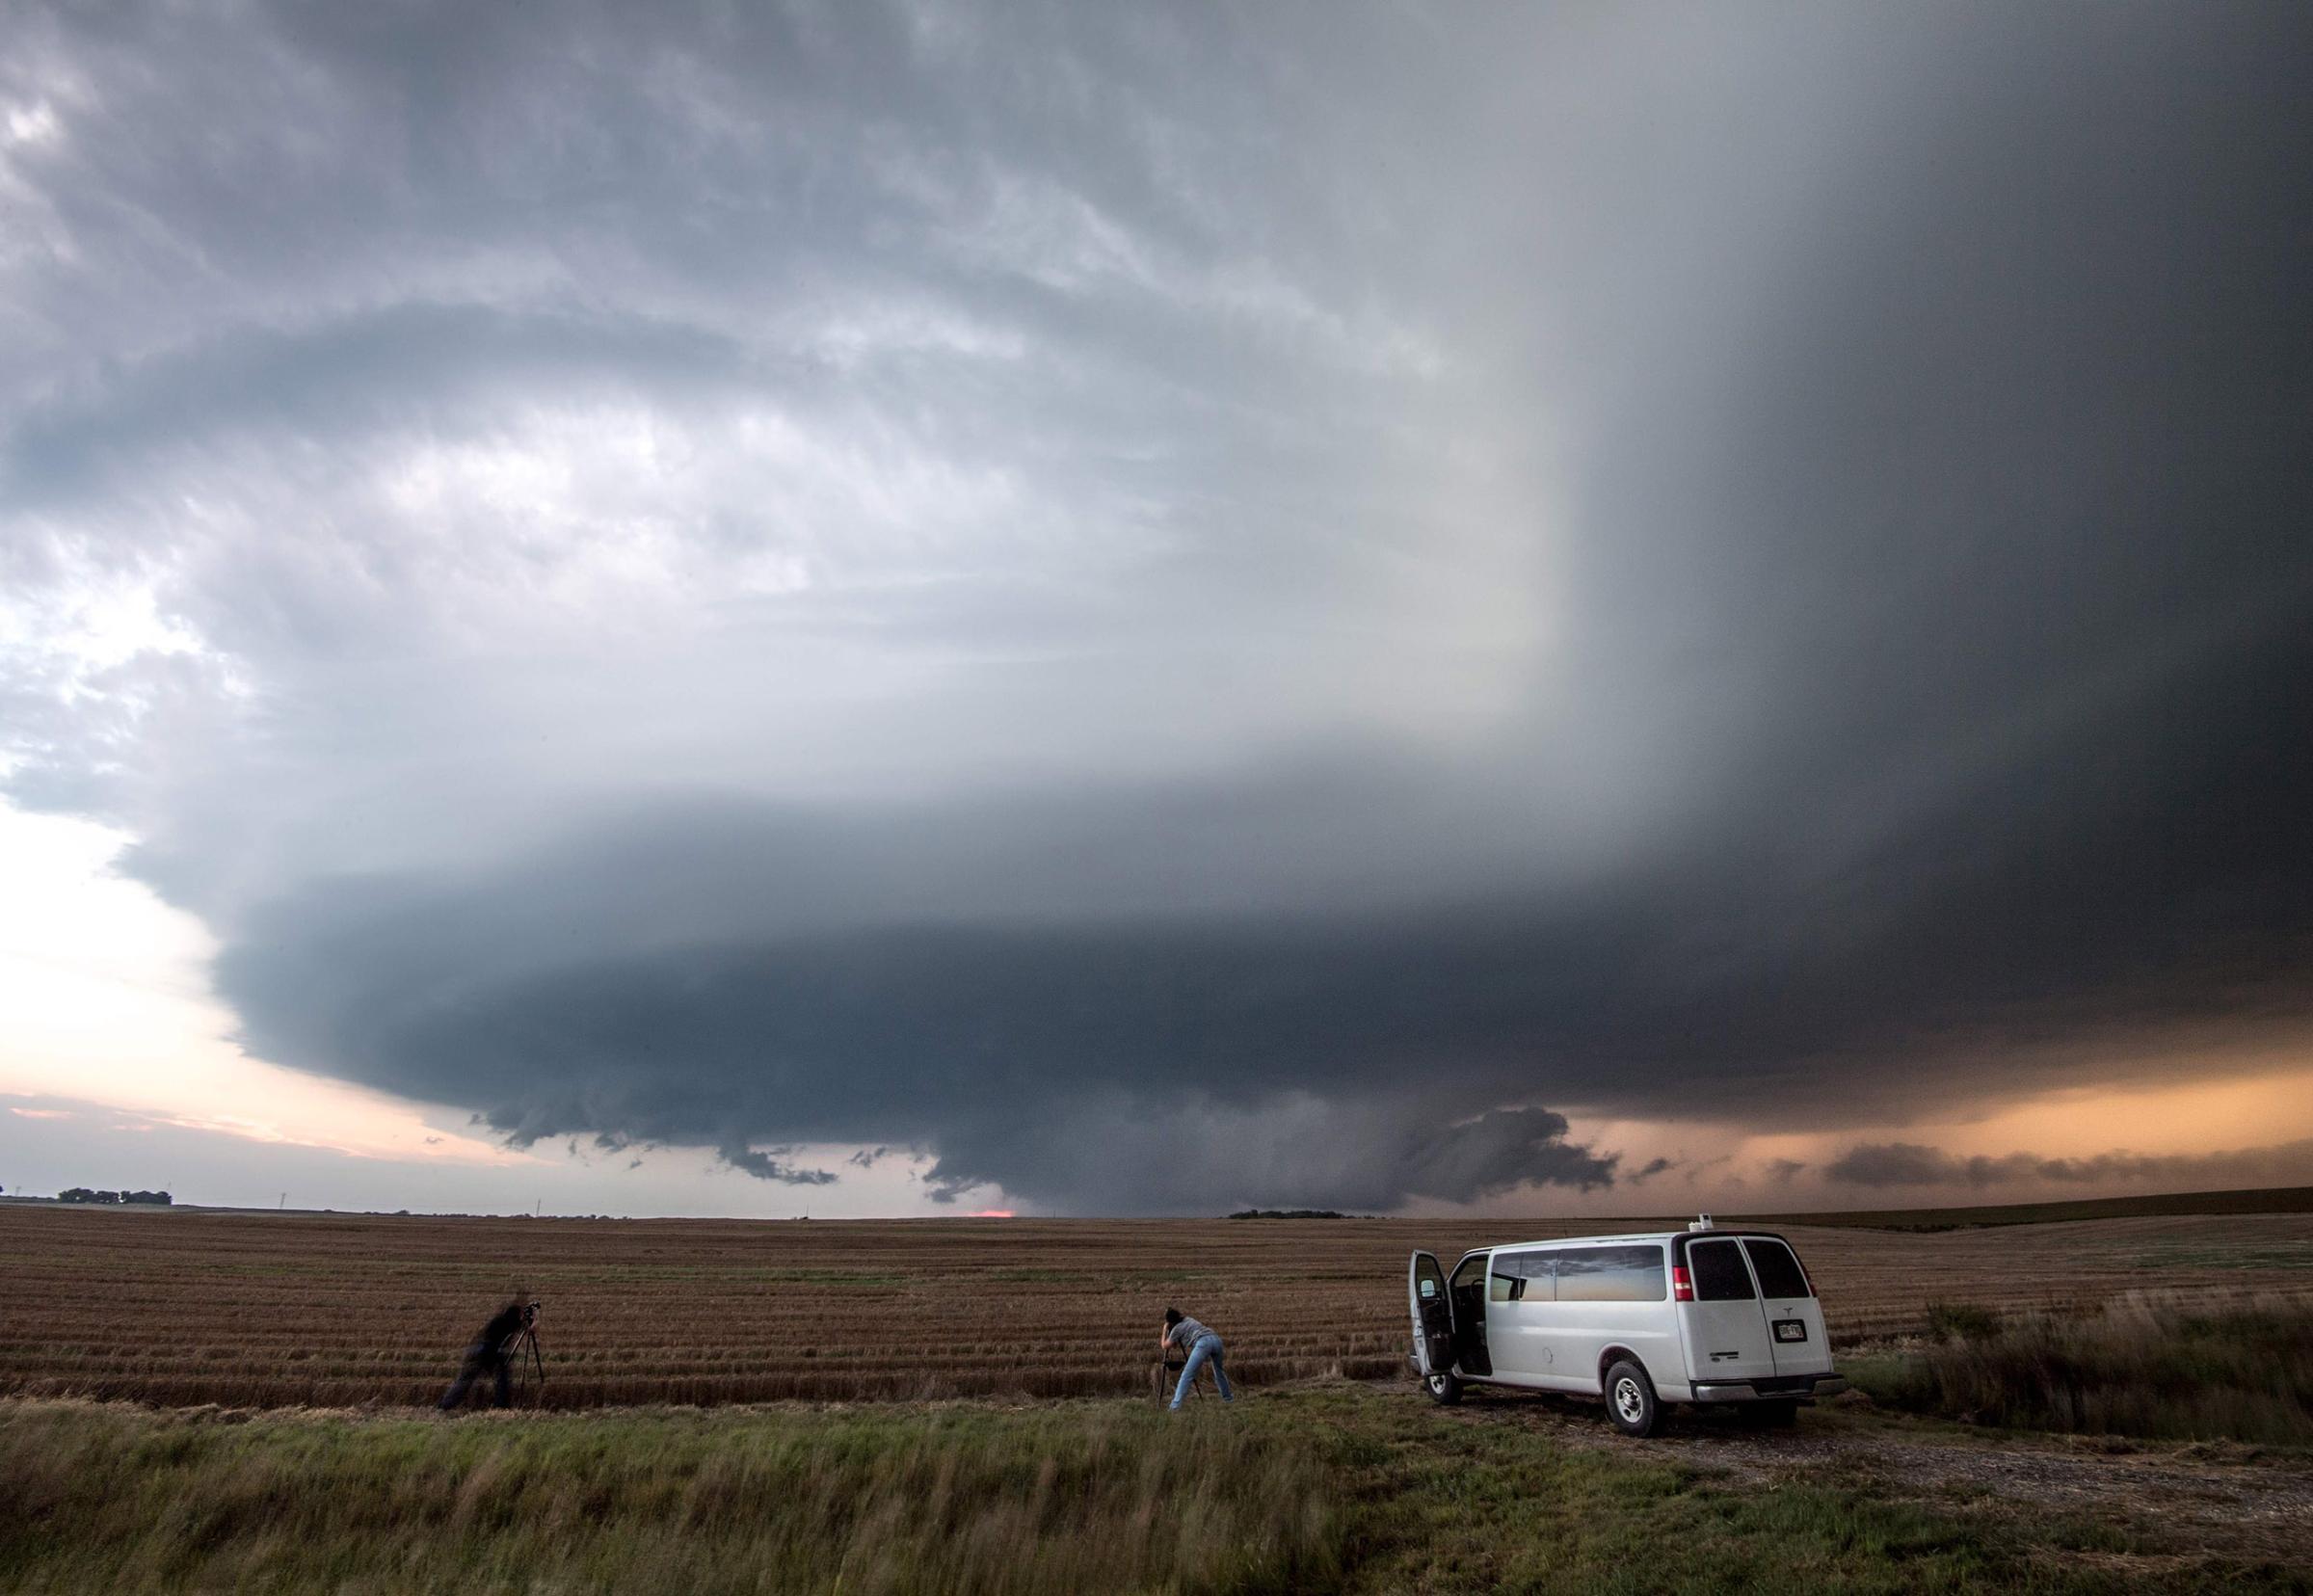 Storm chasing photographers underneath a rotating supercell storm system in Maxwell, Nebraska on Sept. 3, 2016.